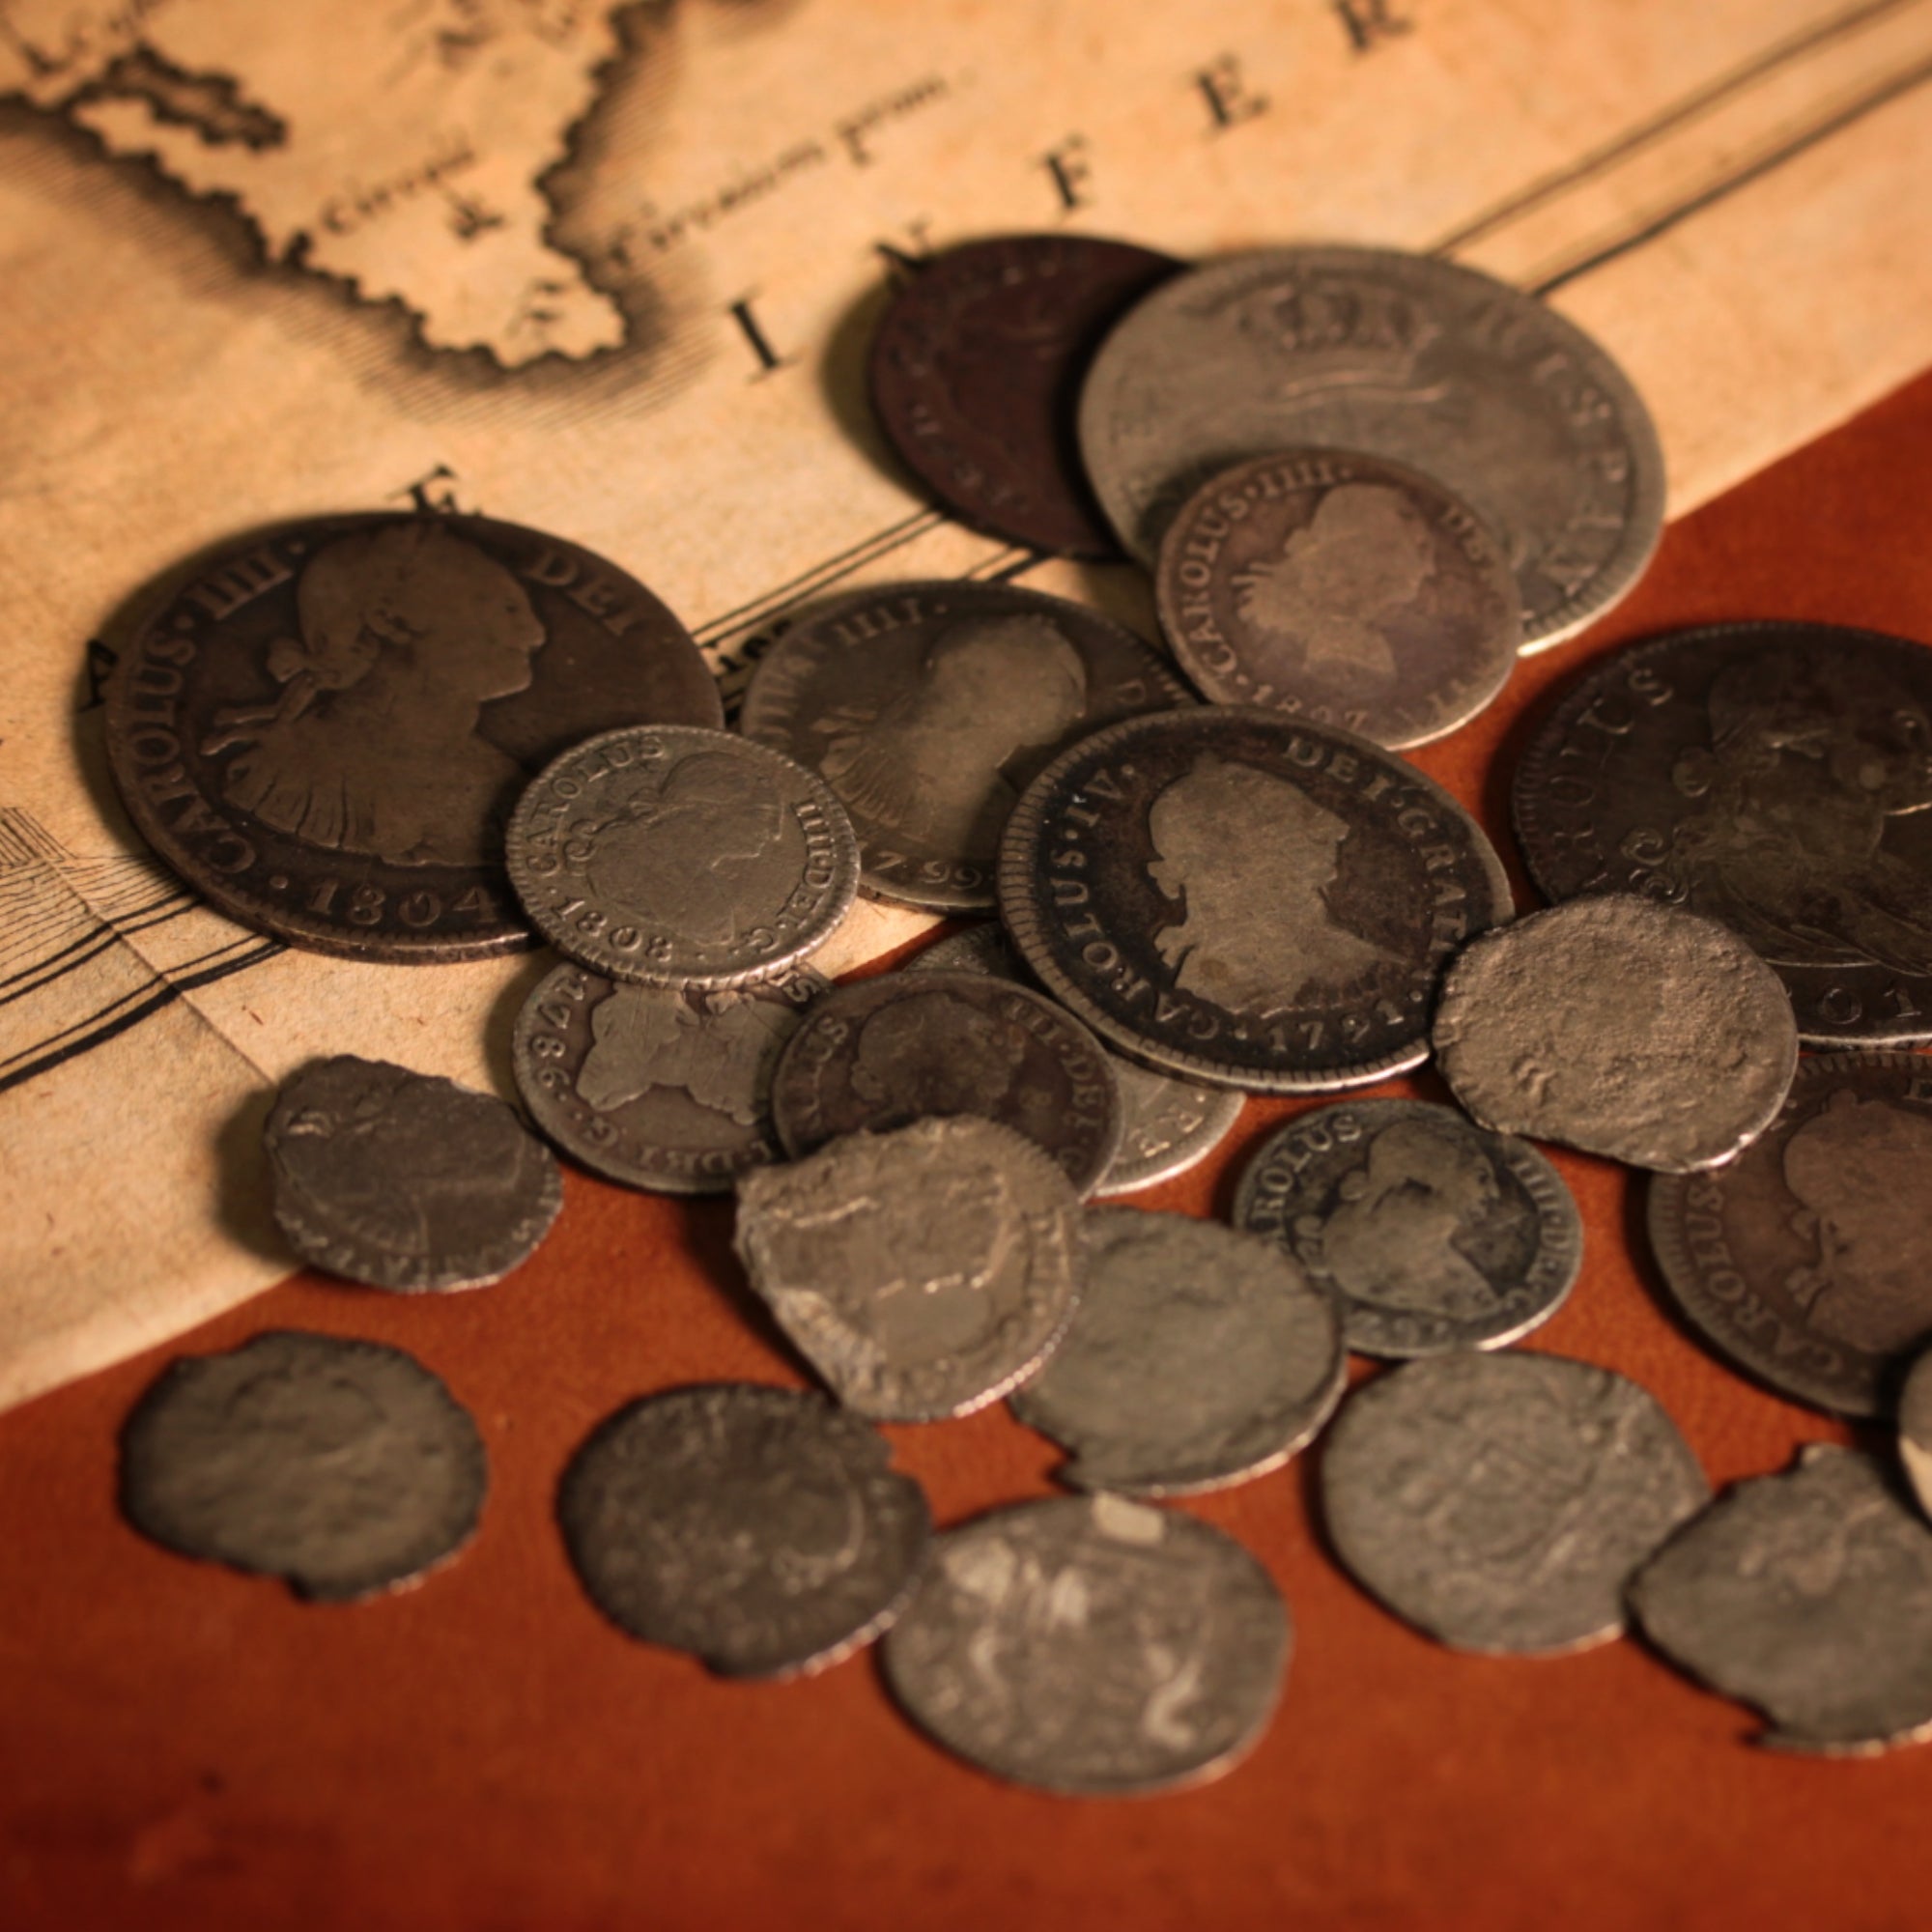 August 23rd Special Offer: Spanish Silver & Shipwreck Coins